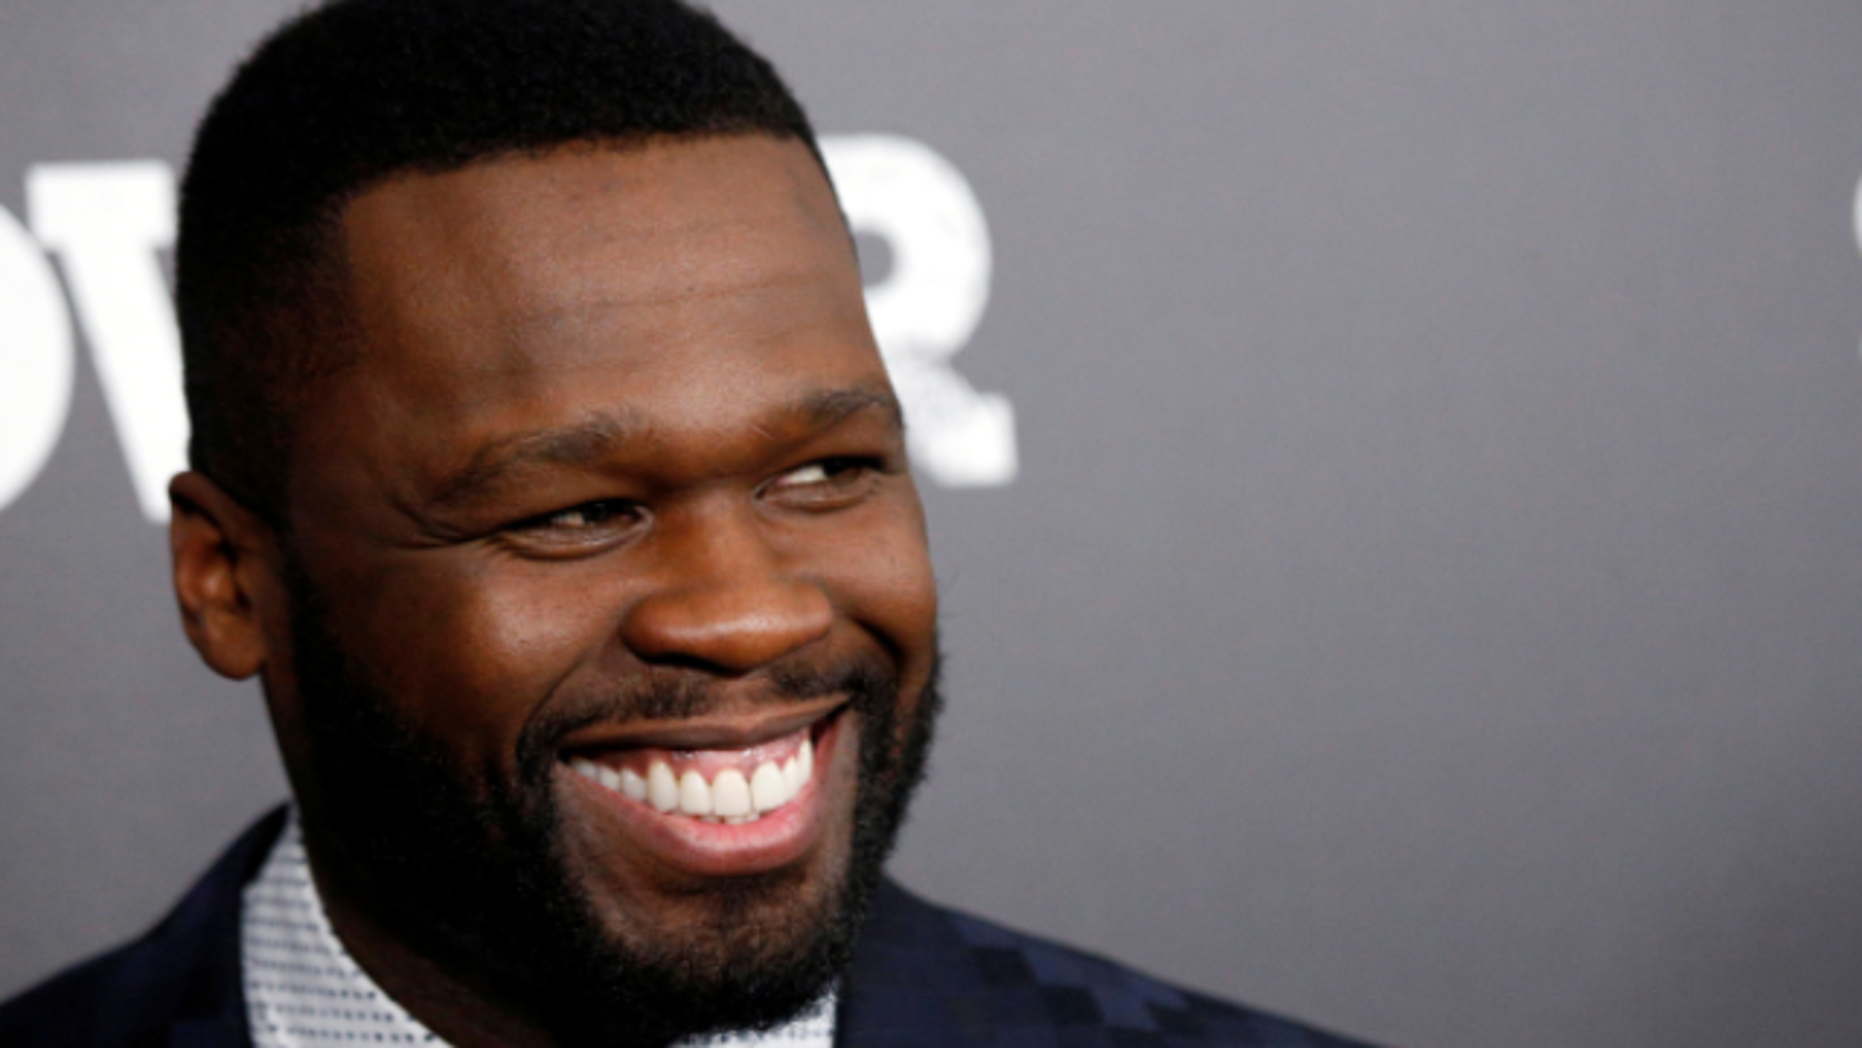 50 Cent says Trump campaign offered him $500,000 in effort to reach ...